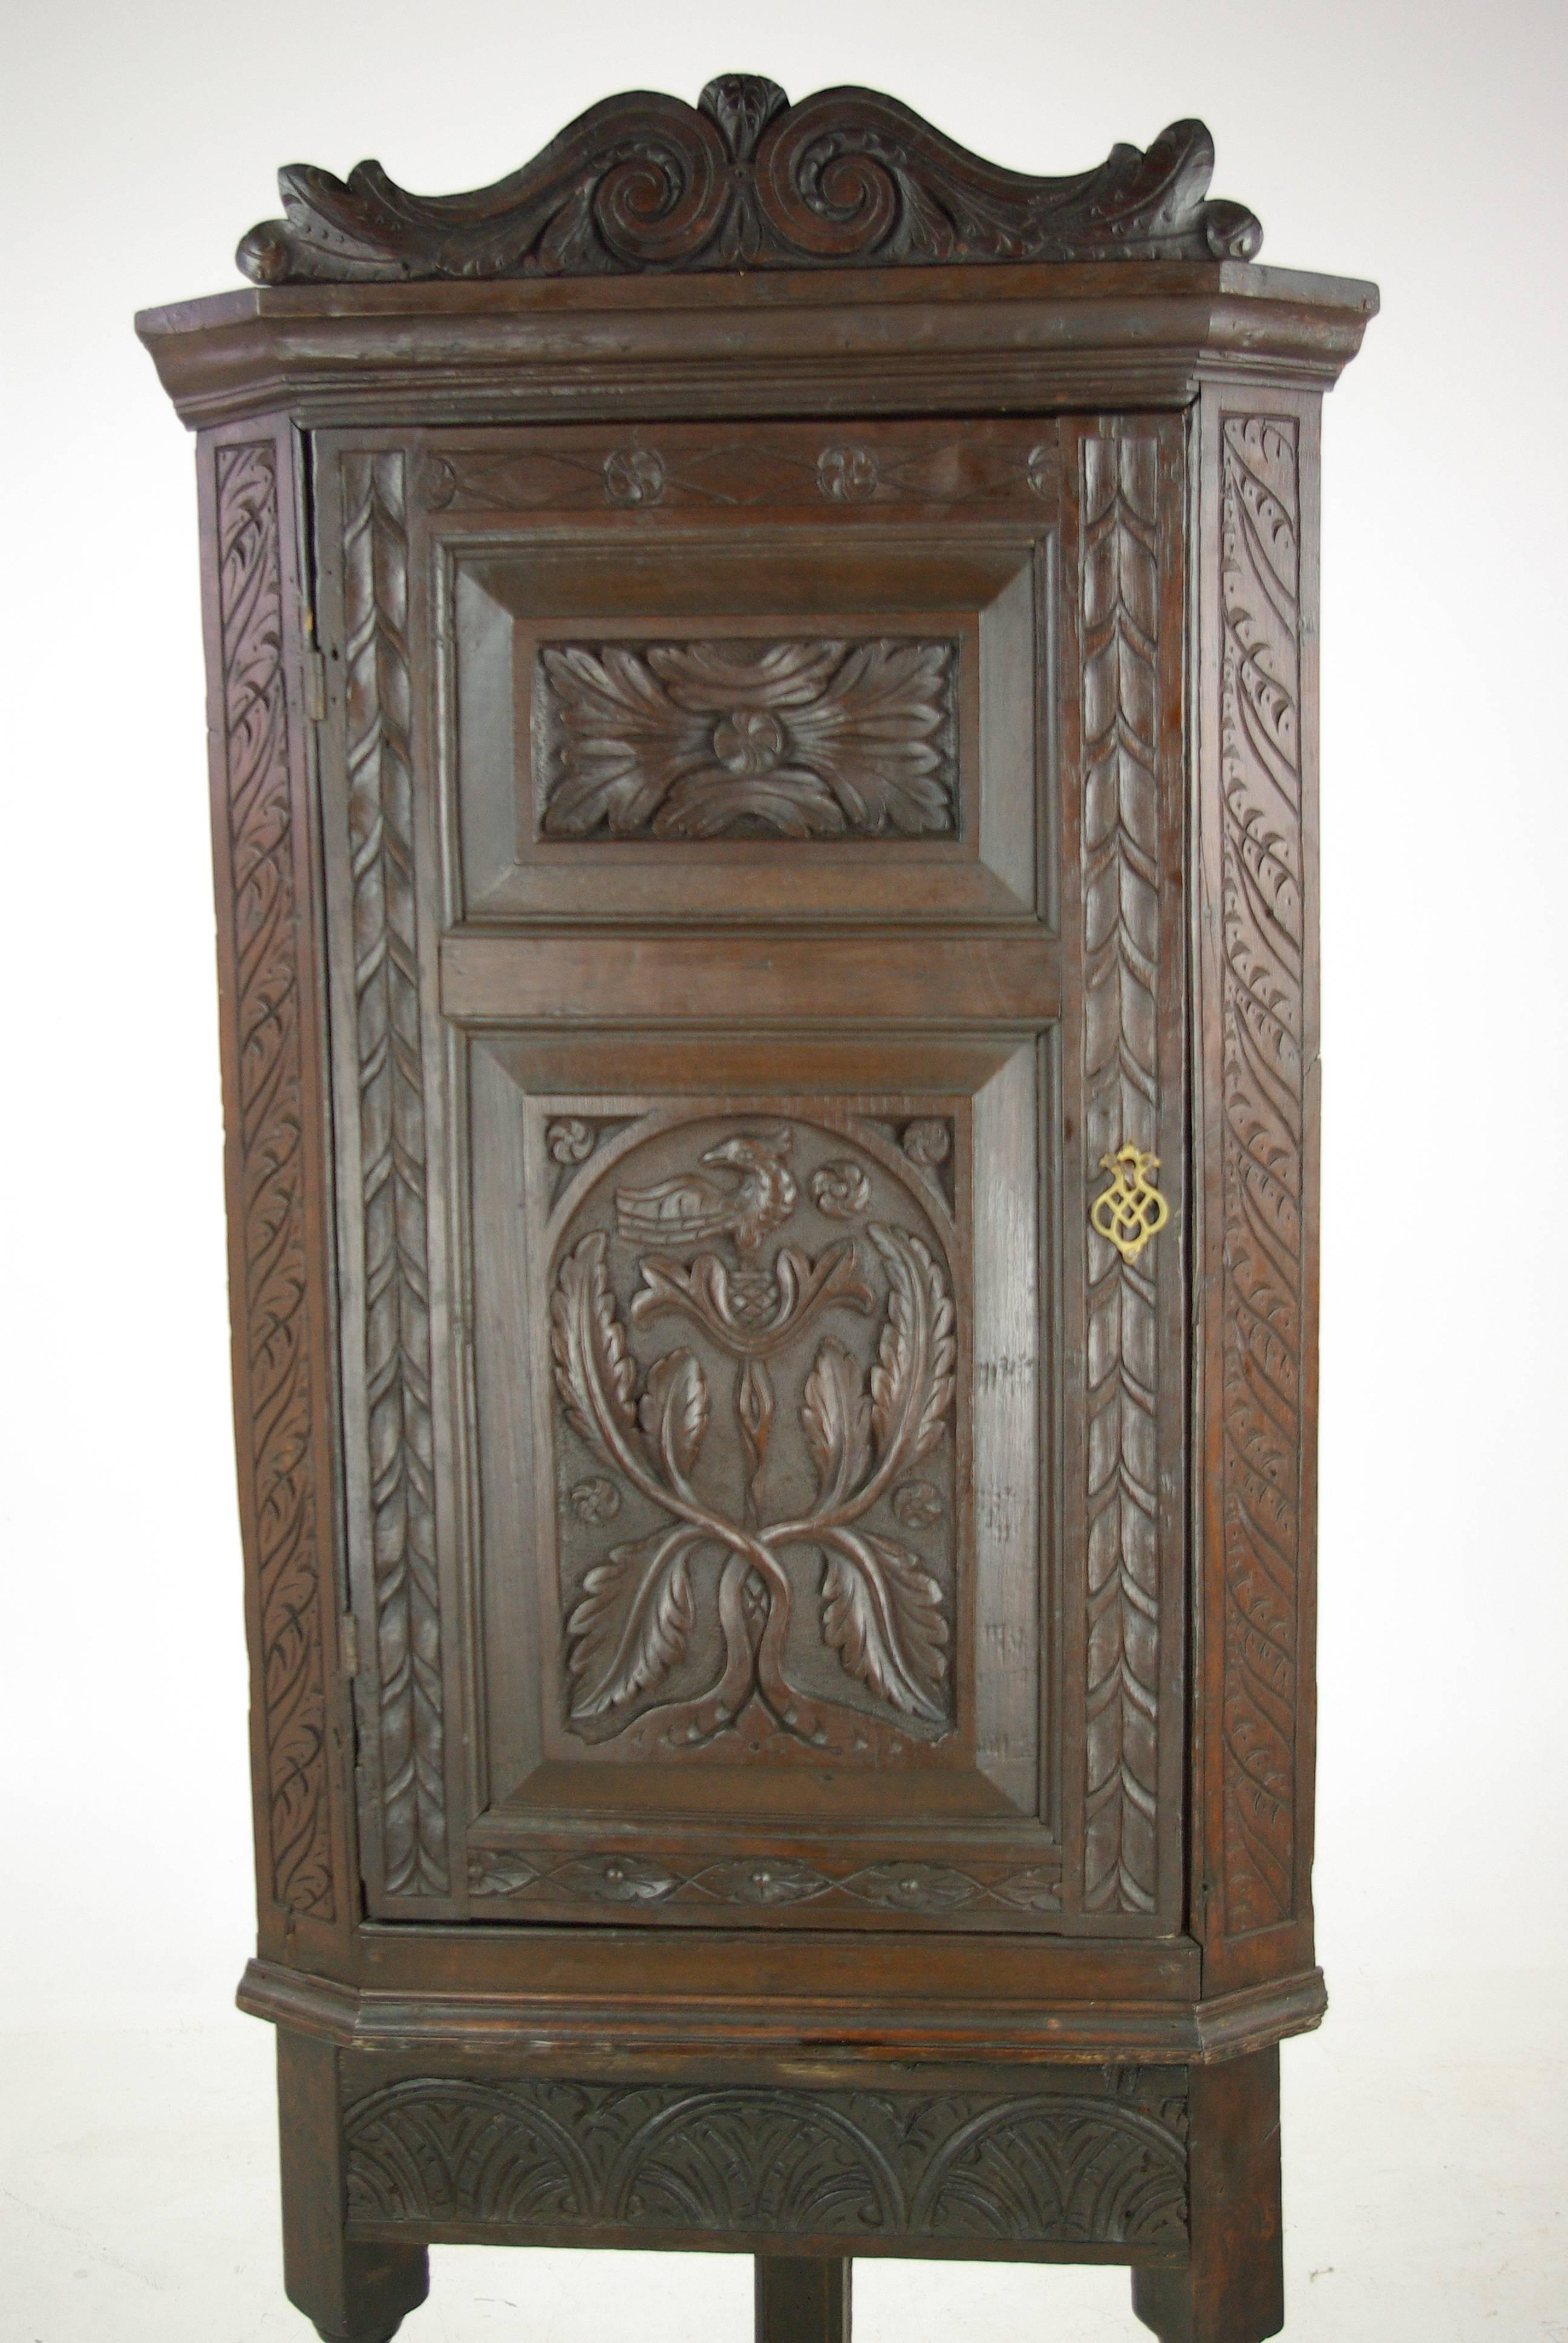 Antique Corner Cabinet, Entryway Organizer, Scotland 1780, Antique Furniture, B974 

Scotland 1780-1800
Solid oak with original finish
Flared cornice with carved pediment
One carved paneled door
Carved sides
Two fixed shelves interior
Very